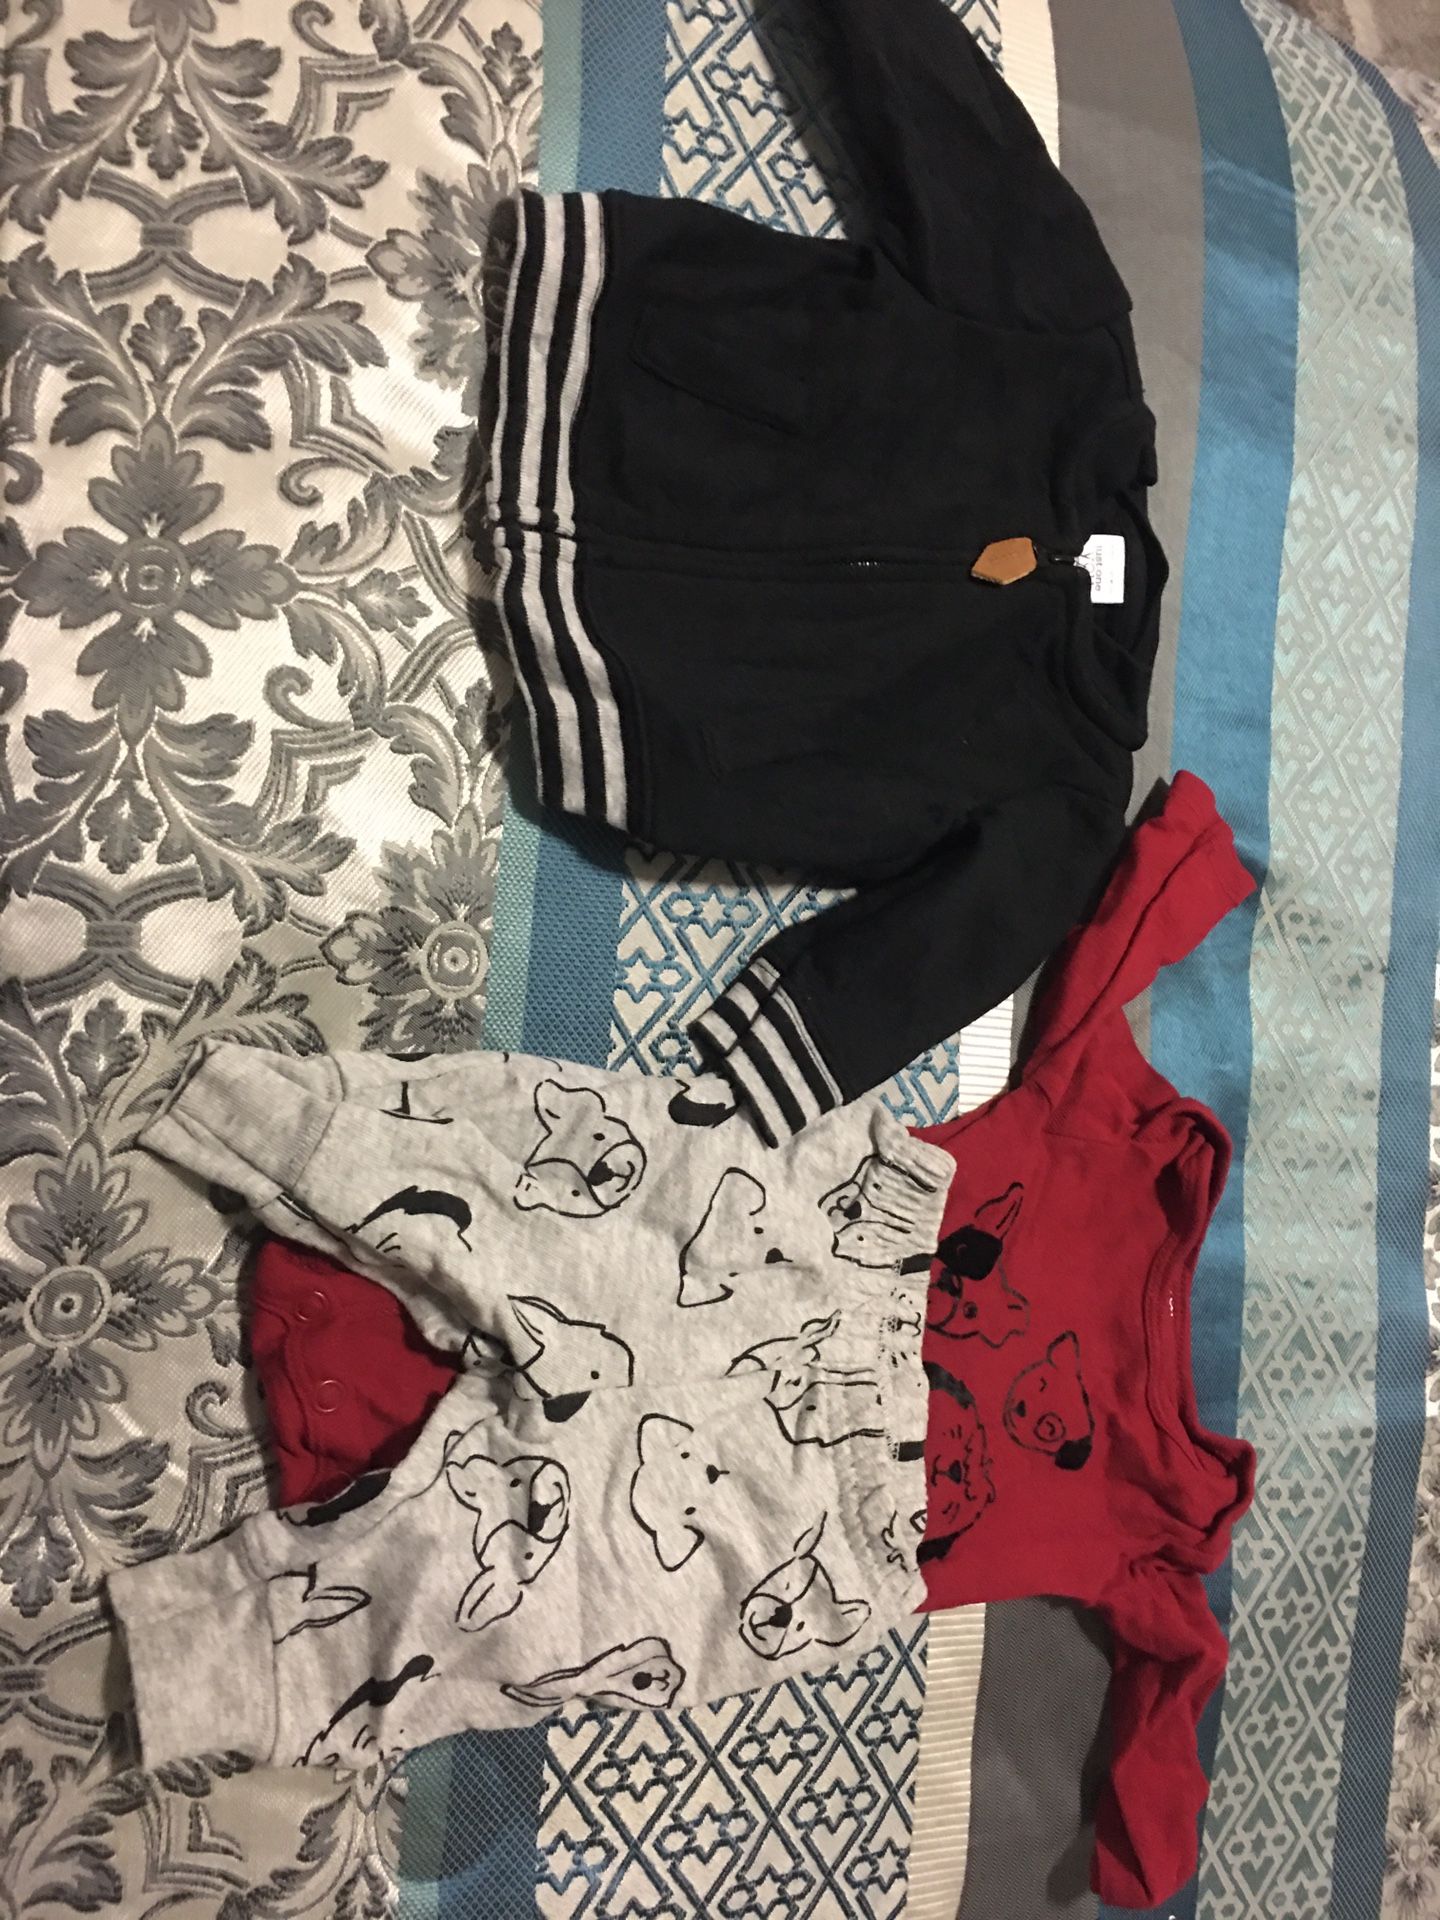 Free newborn baby boy clothes and more